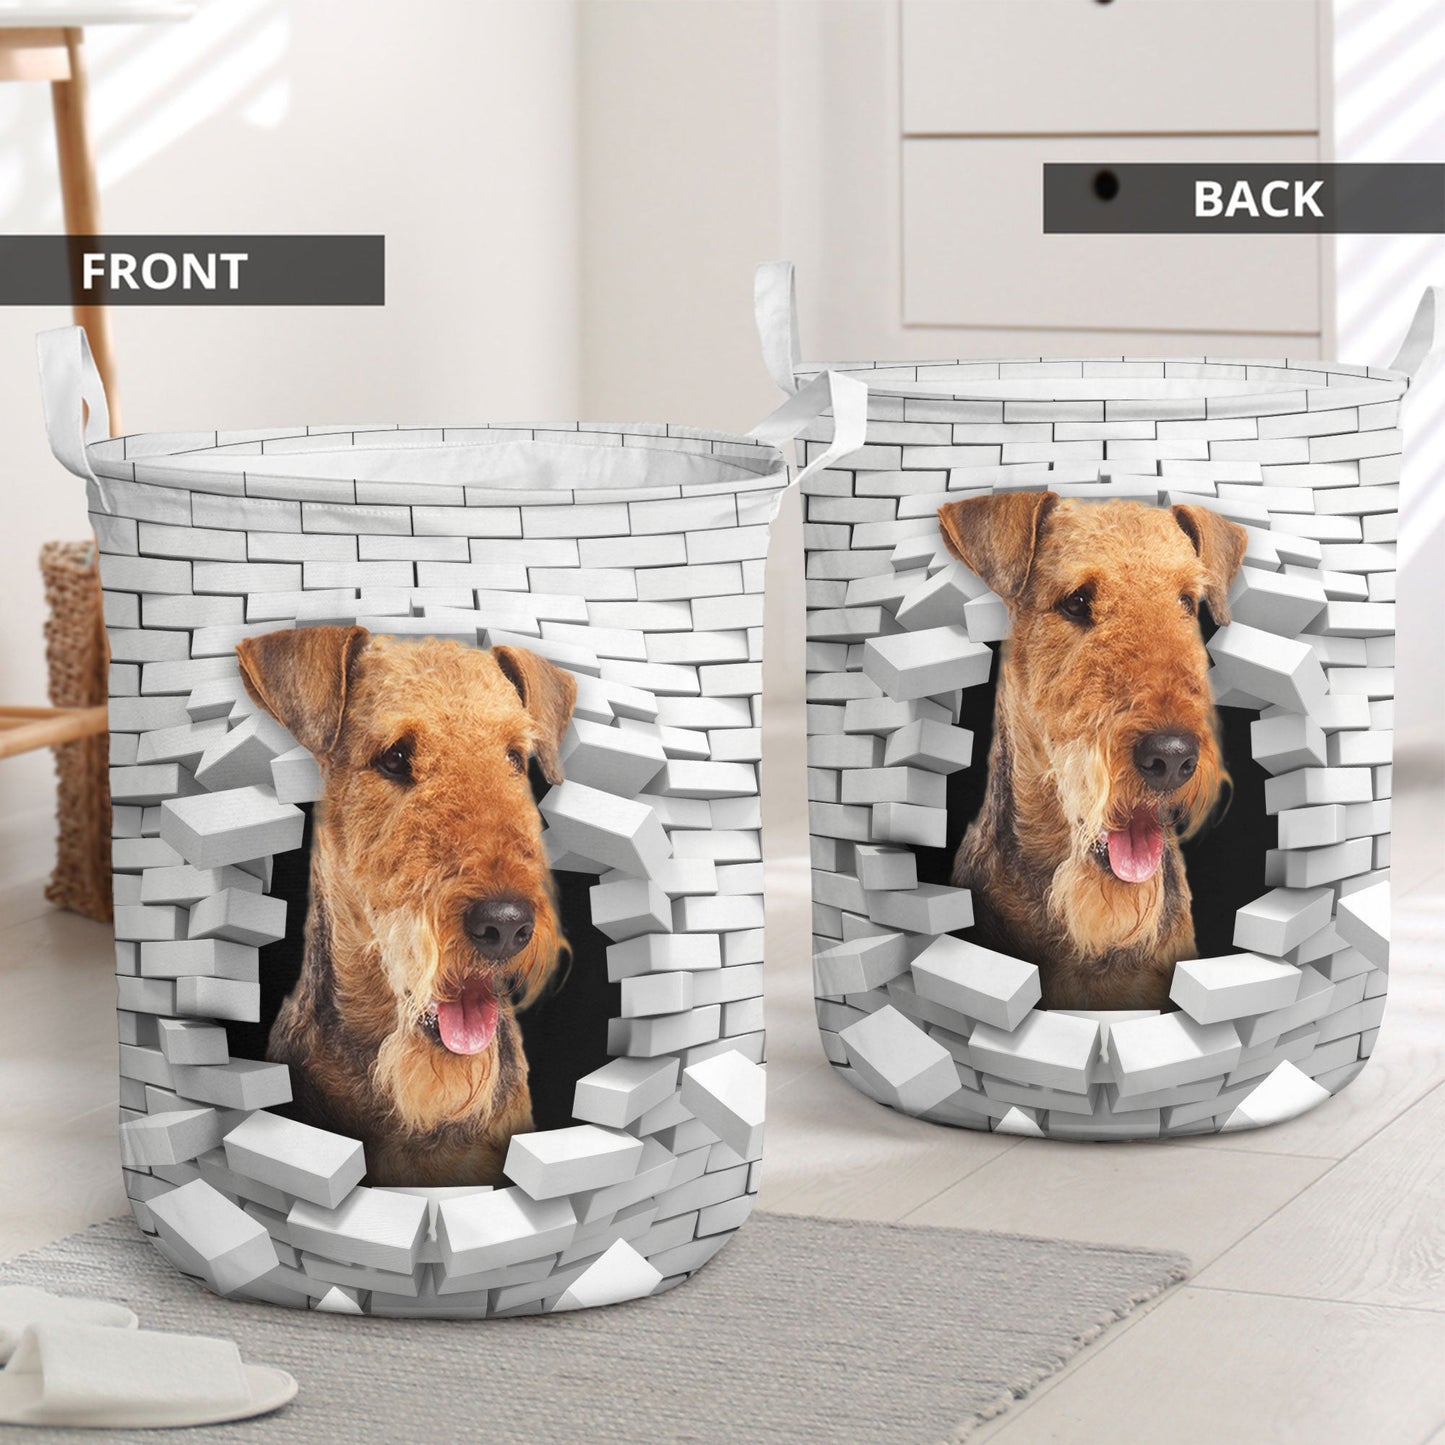 Airedale Terrier - In The Hole Of Wall Pattern Laundry Basket